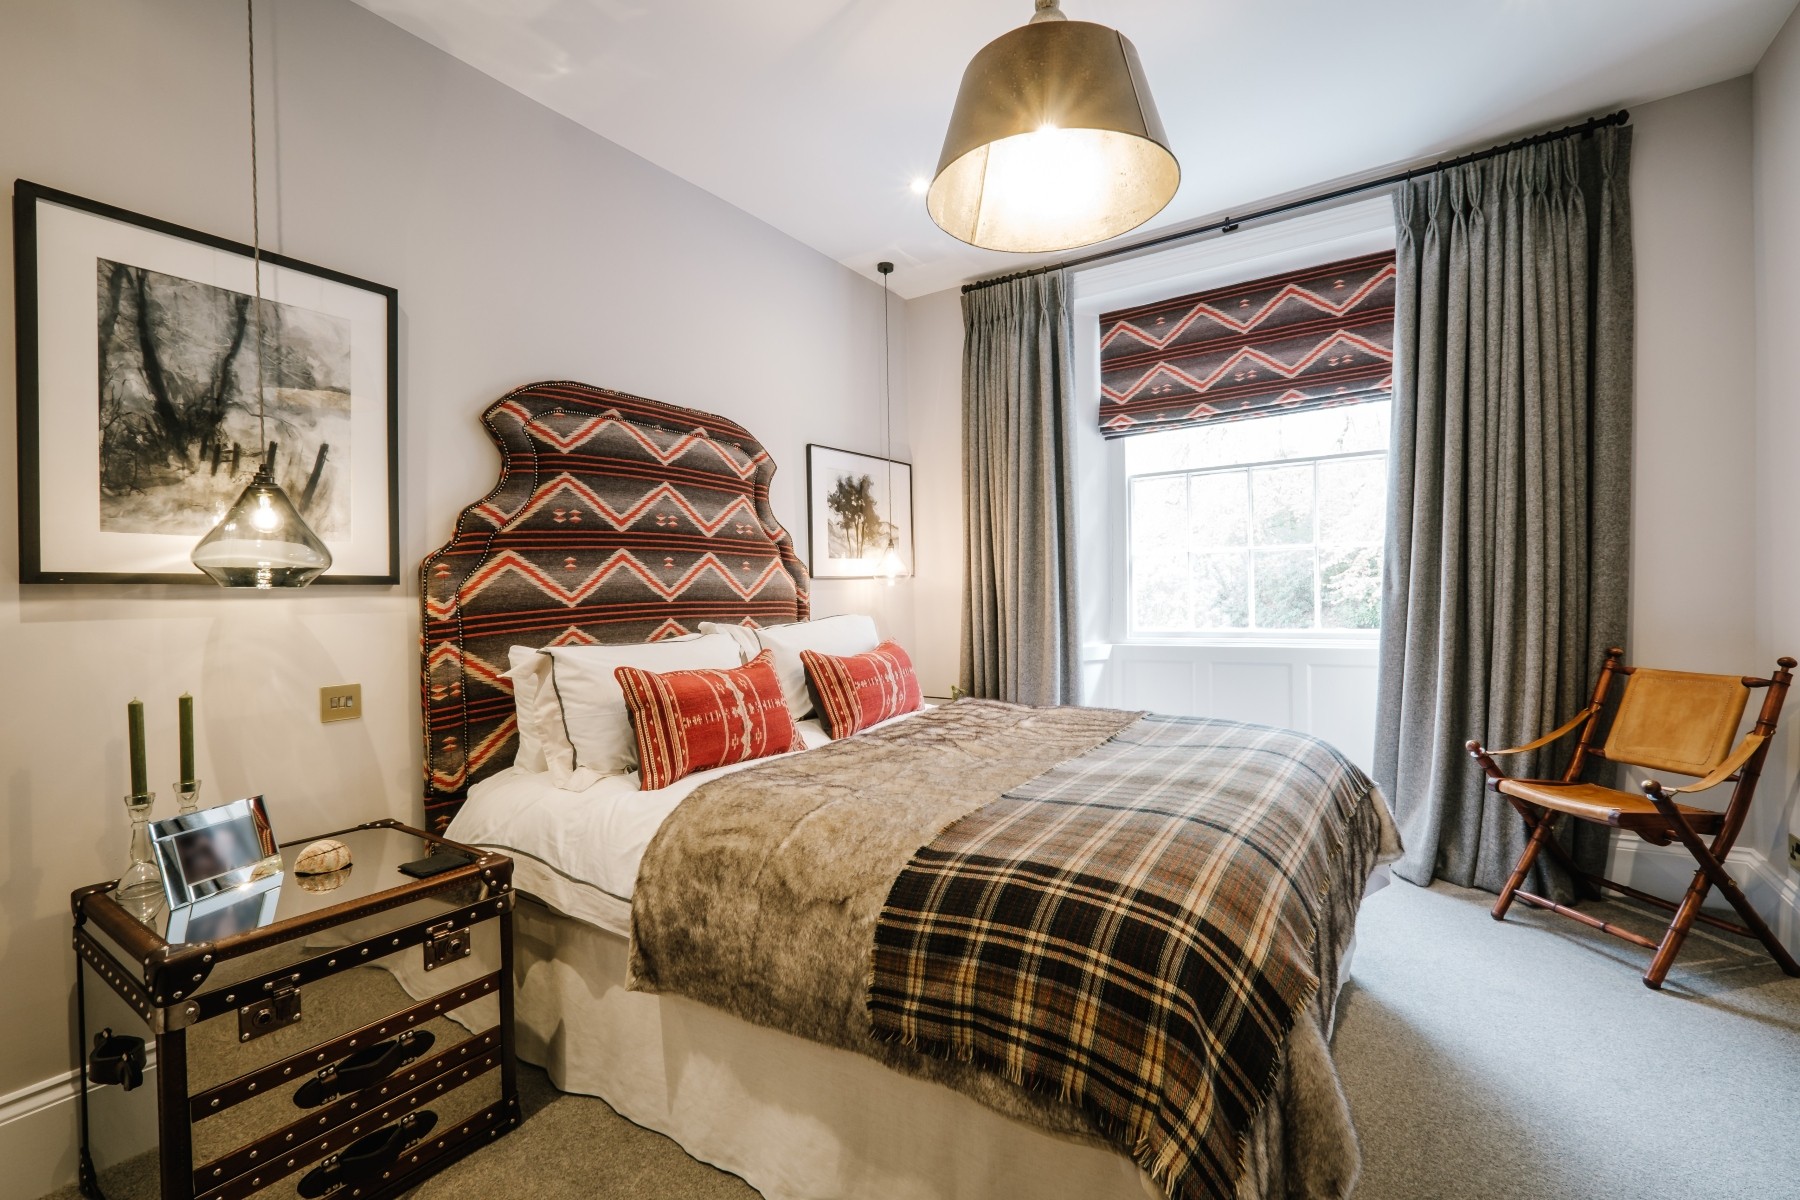 Bedroom with an earthy inspired brown, white and red immersive theme, double bed with headboard, pendant light and full height curtains